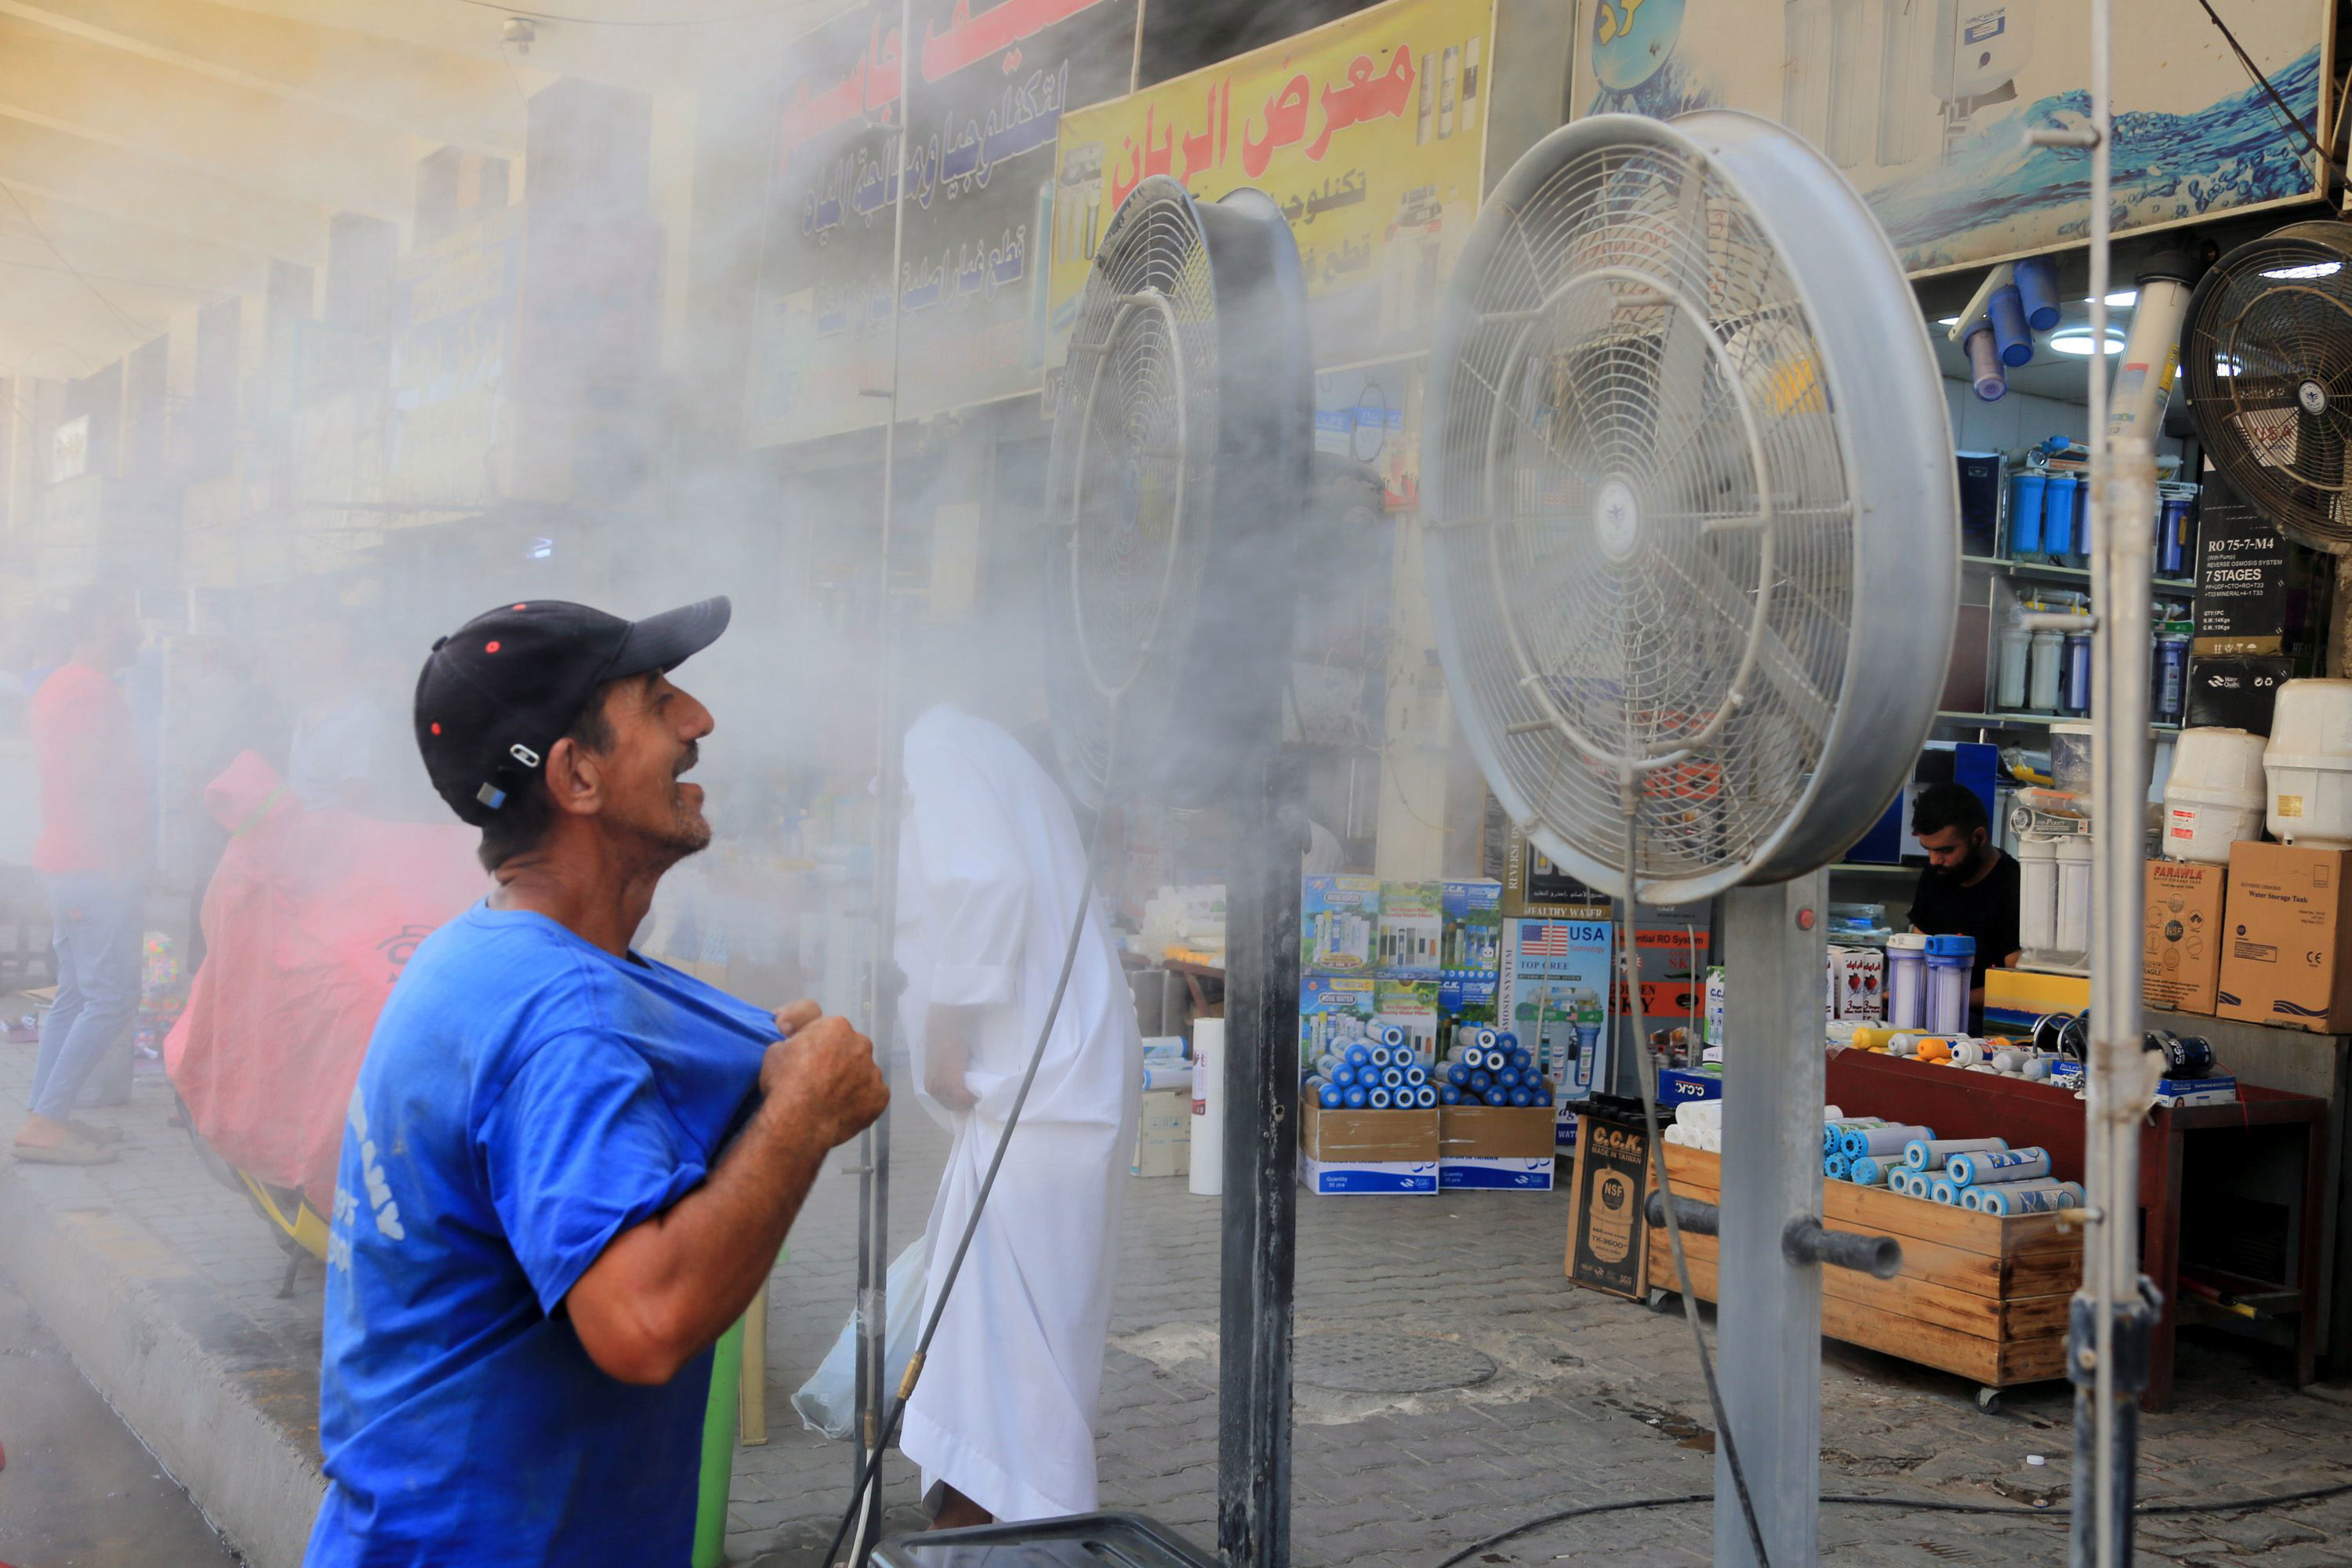 Iraqis Try To Stay Cool During Heatwave — In Pictures